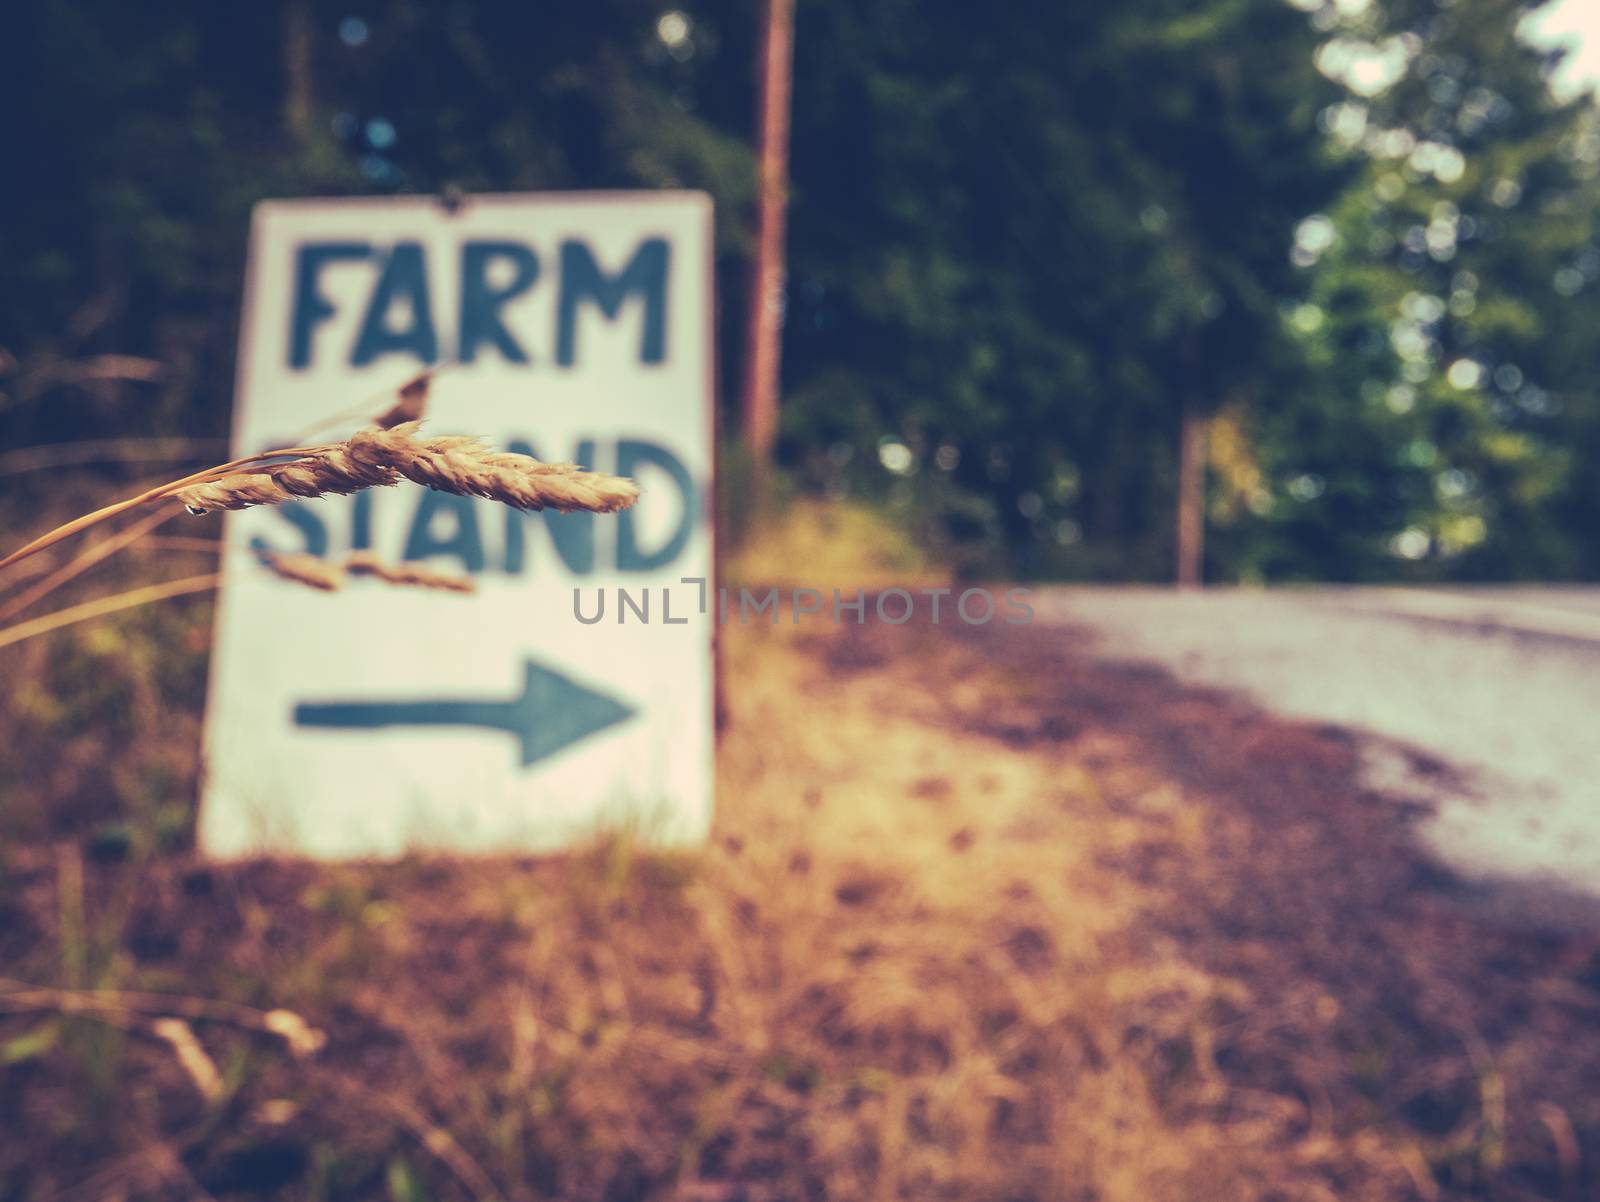 Rustic Sign For A Farm Stand By The Roadside